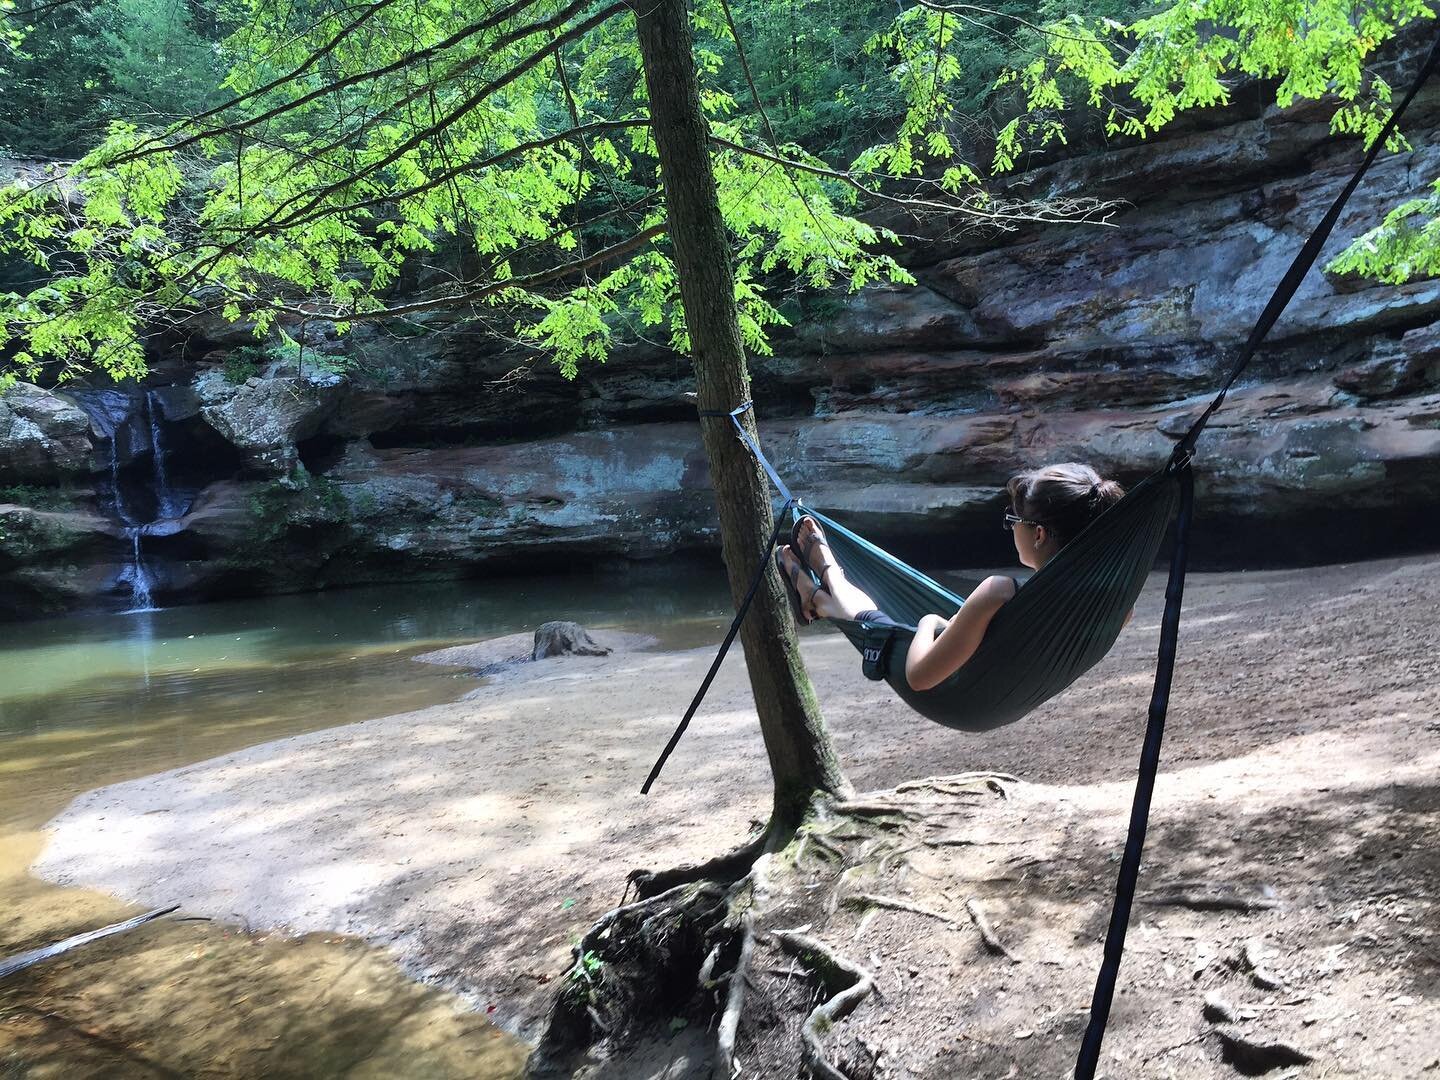 What are we planning for 2020? We&rsquo;re talking about our travel plans for this year on the blog. Link in bio! #travelbloggers #travel #hockinghills #blogger #ooo #outofoffice #outpfofficeadventure #adventure #wanderlust